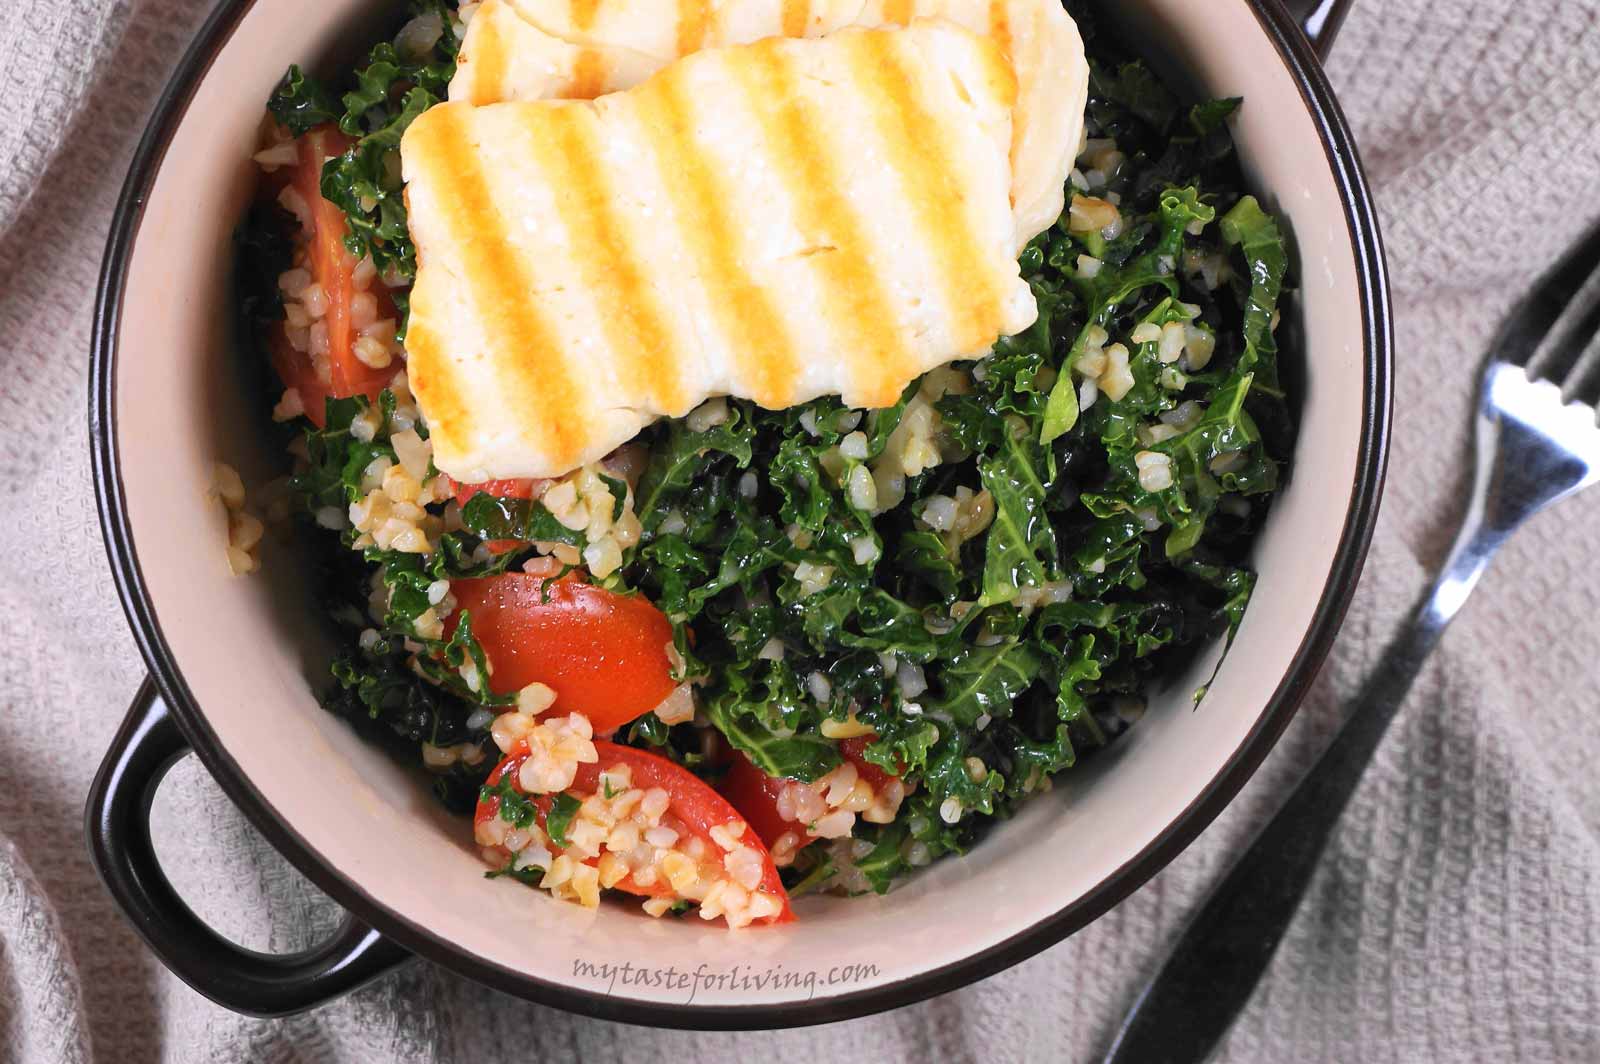 Nutritious salad prepared with kale, cherry tomatoes, red onions, bulgur and roasted halloumi.